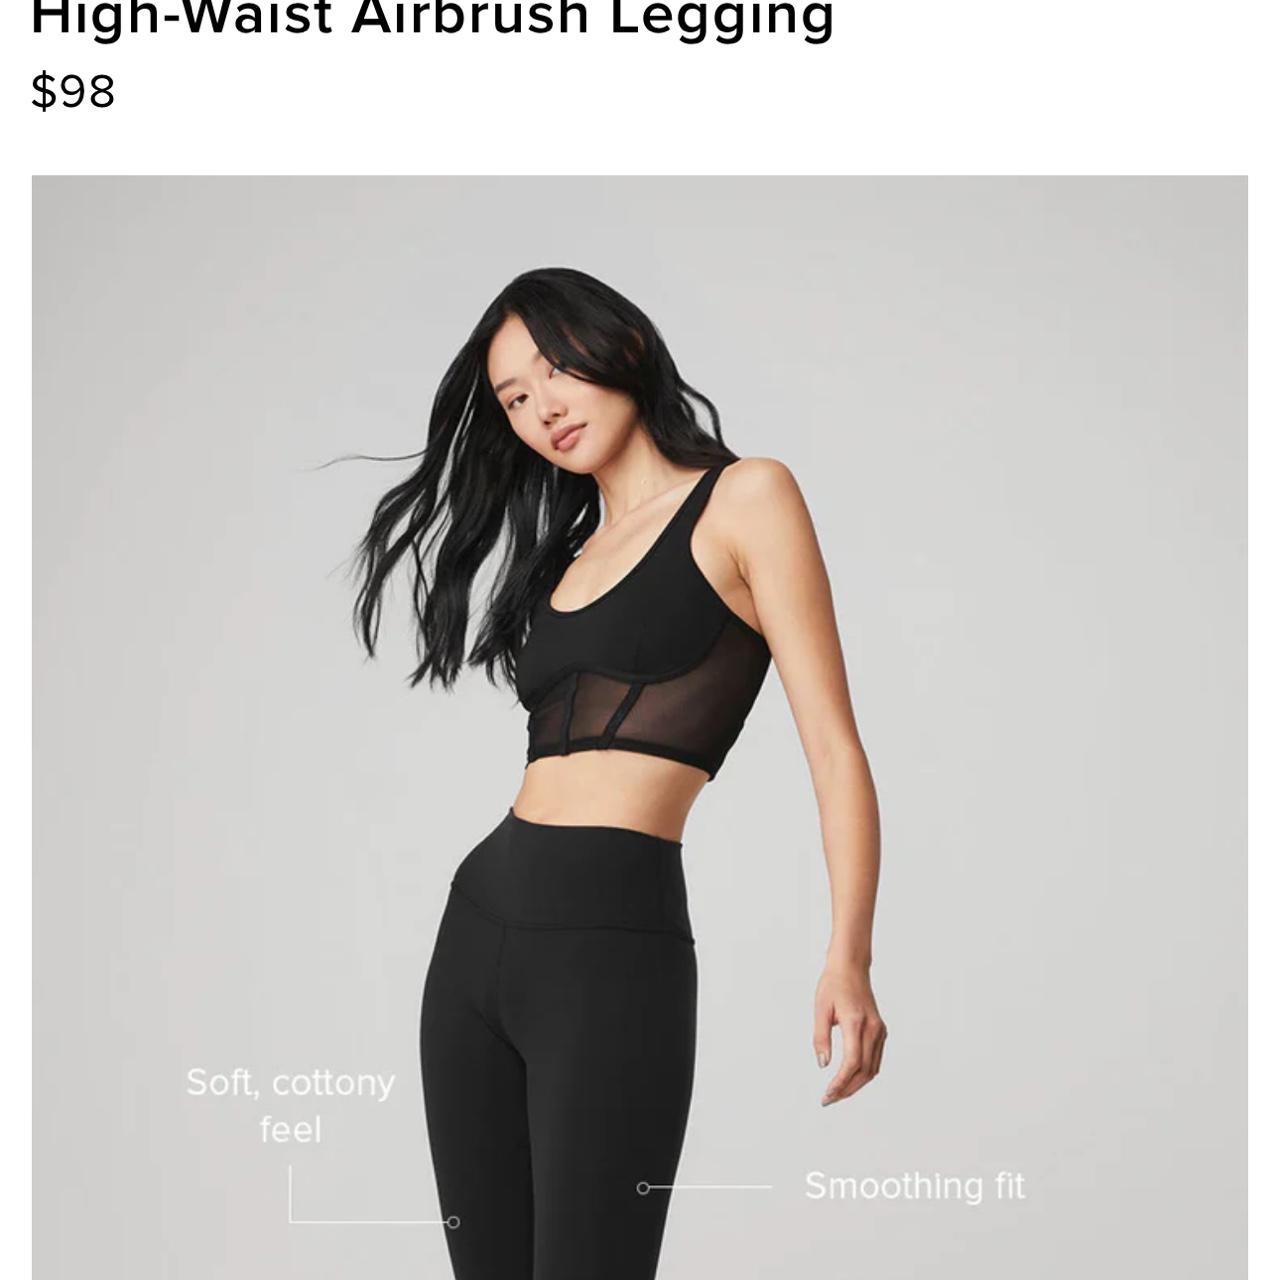 Is this for real? 7/8 High-Waist Airbrush Legging: completely see